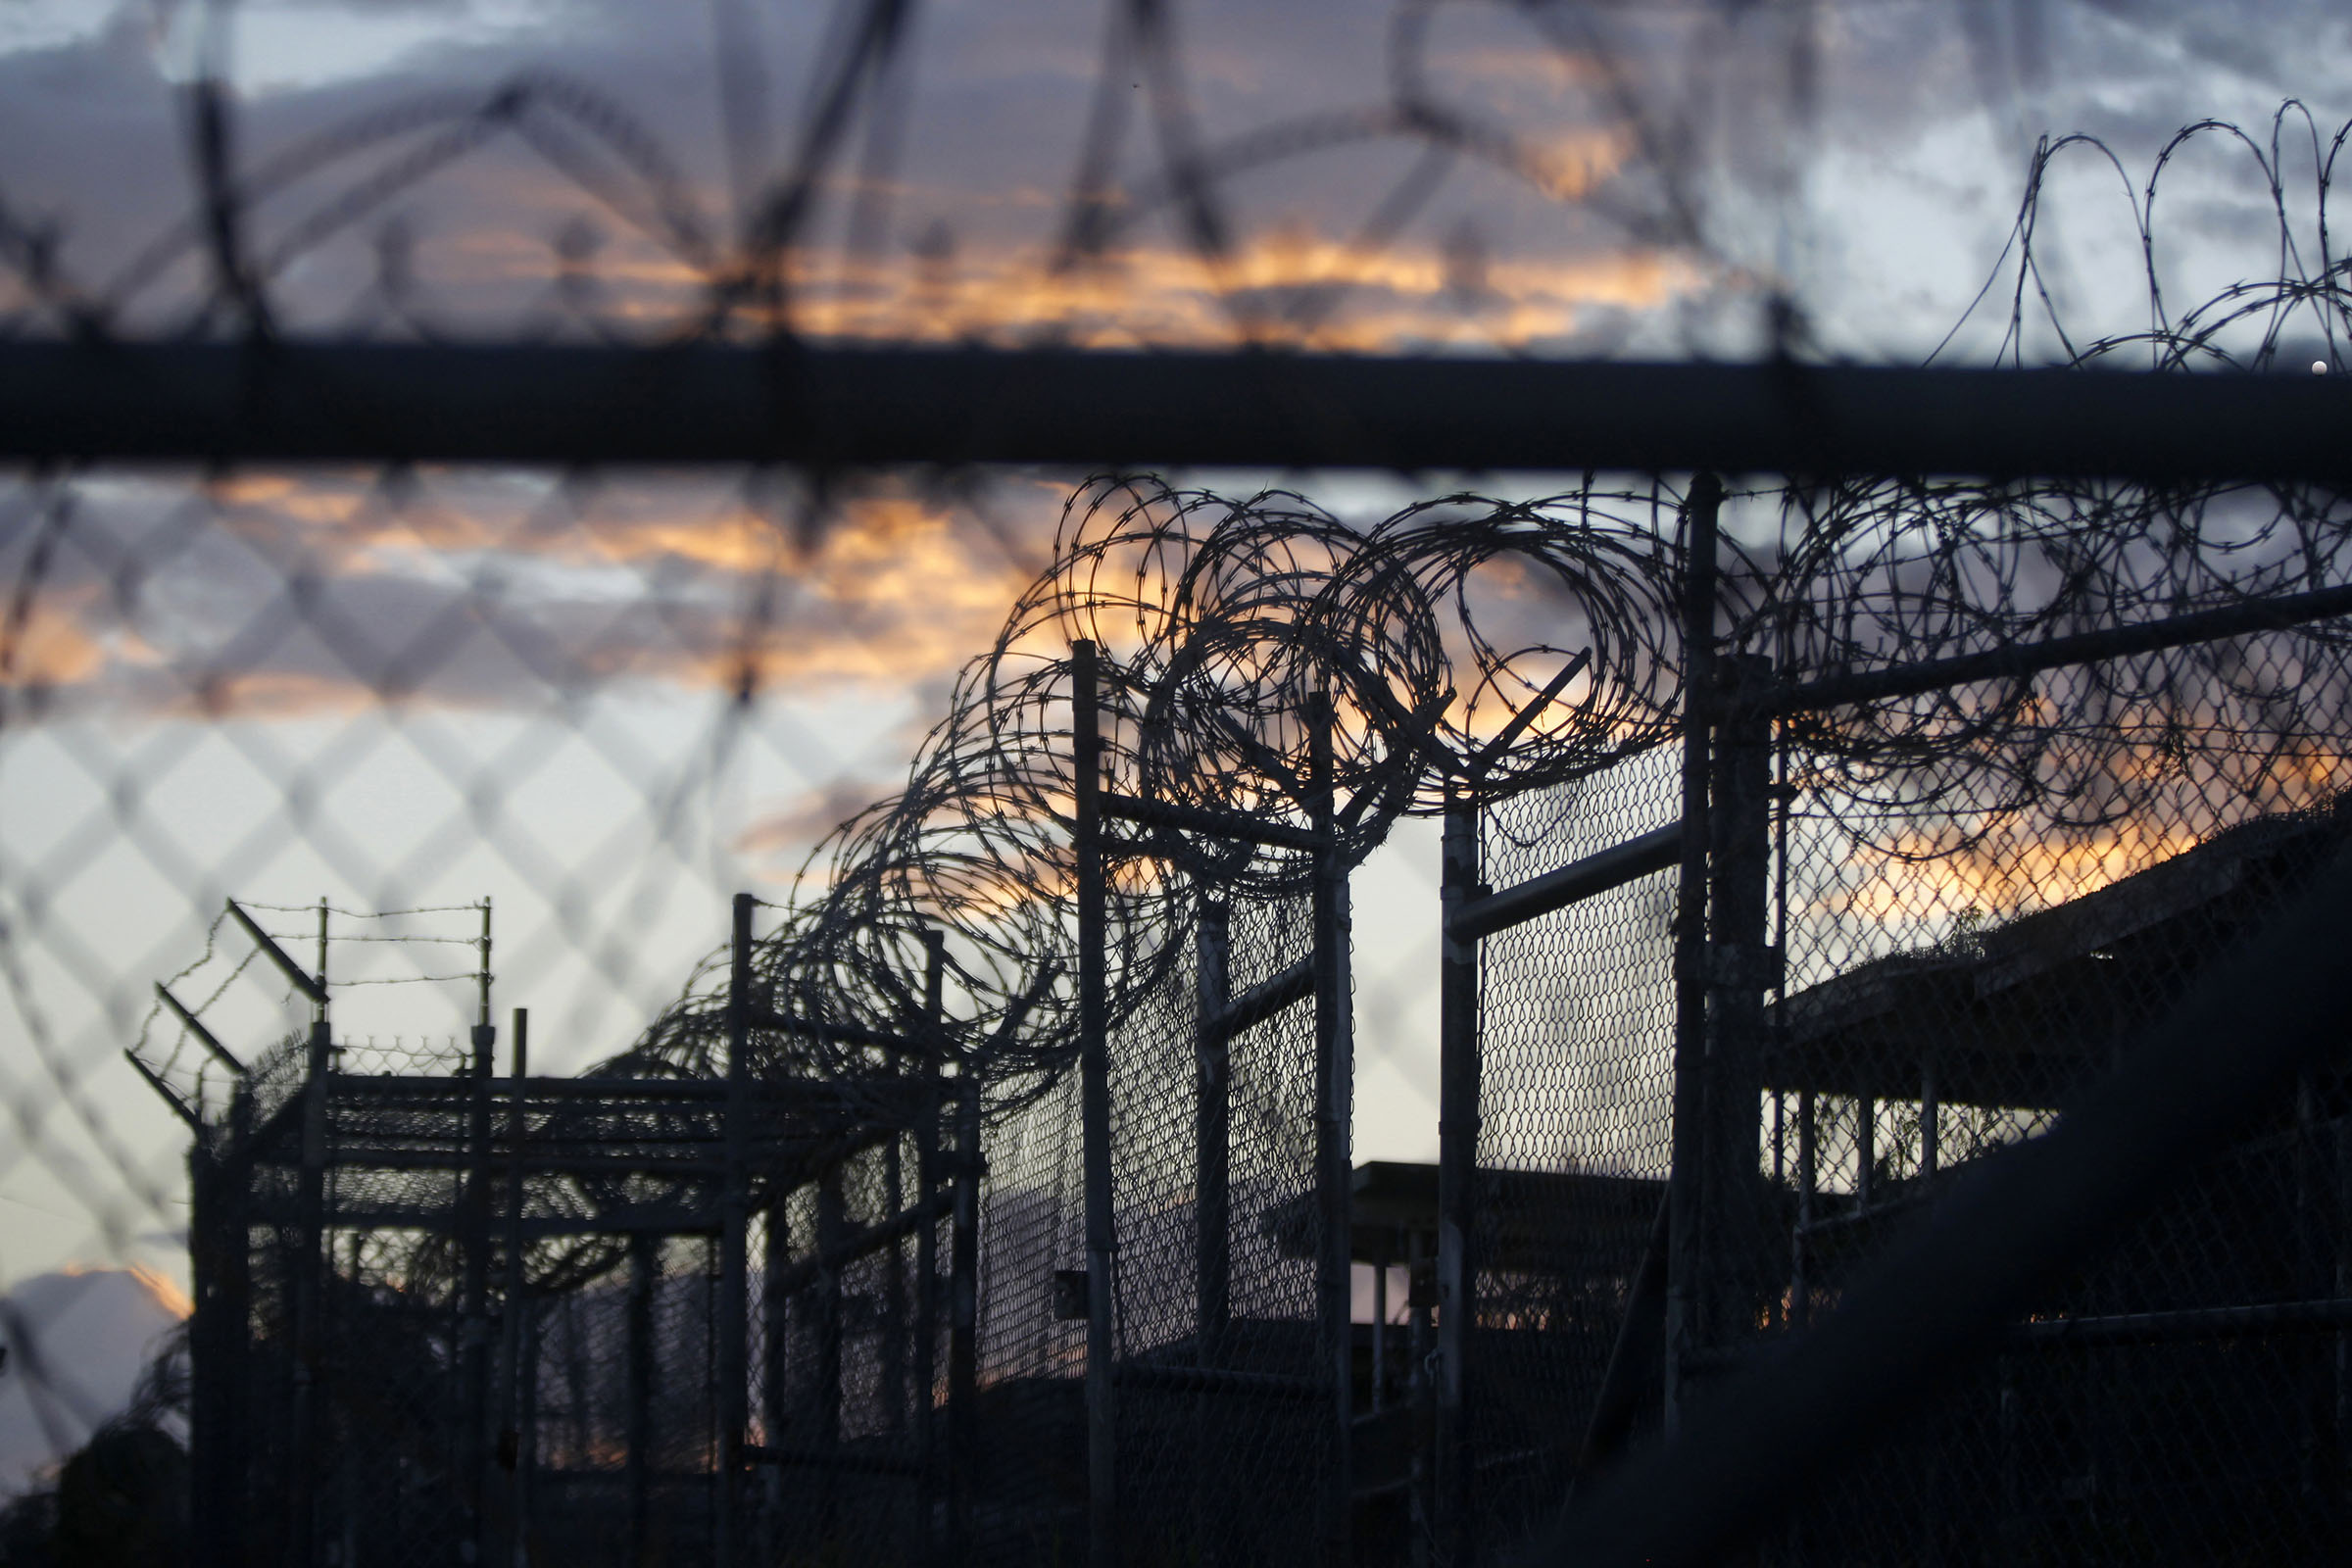 Hurricane forces Guantanamo Bay evacuations, but detainees remain